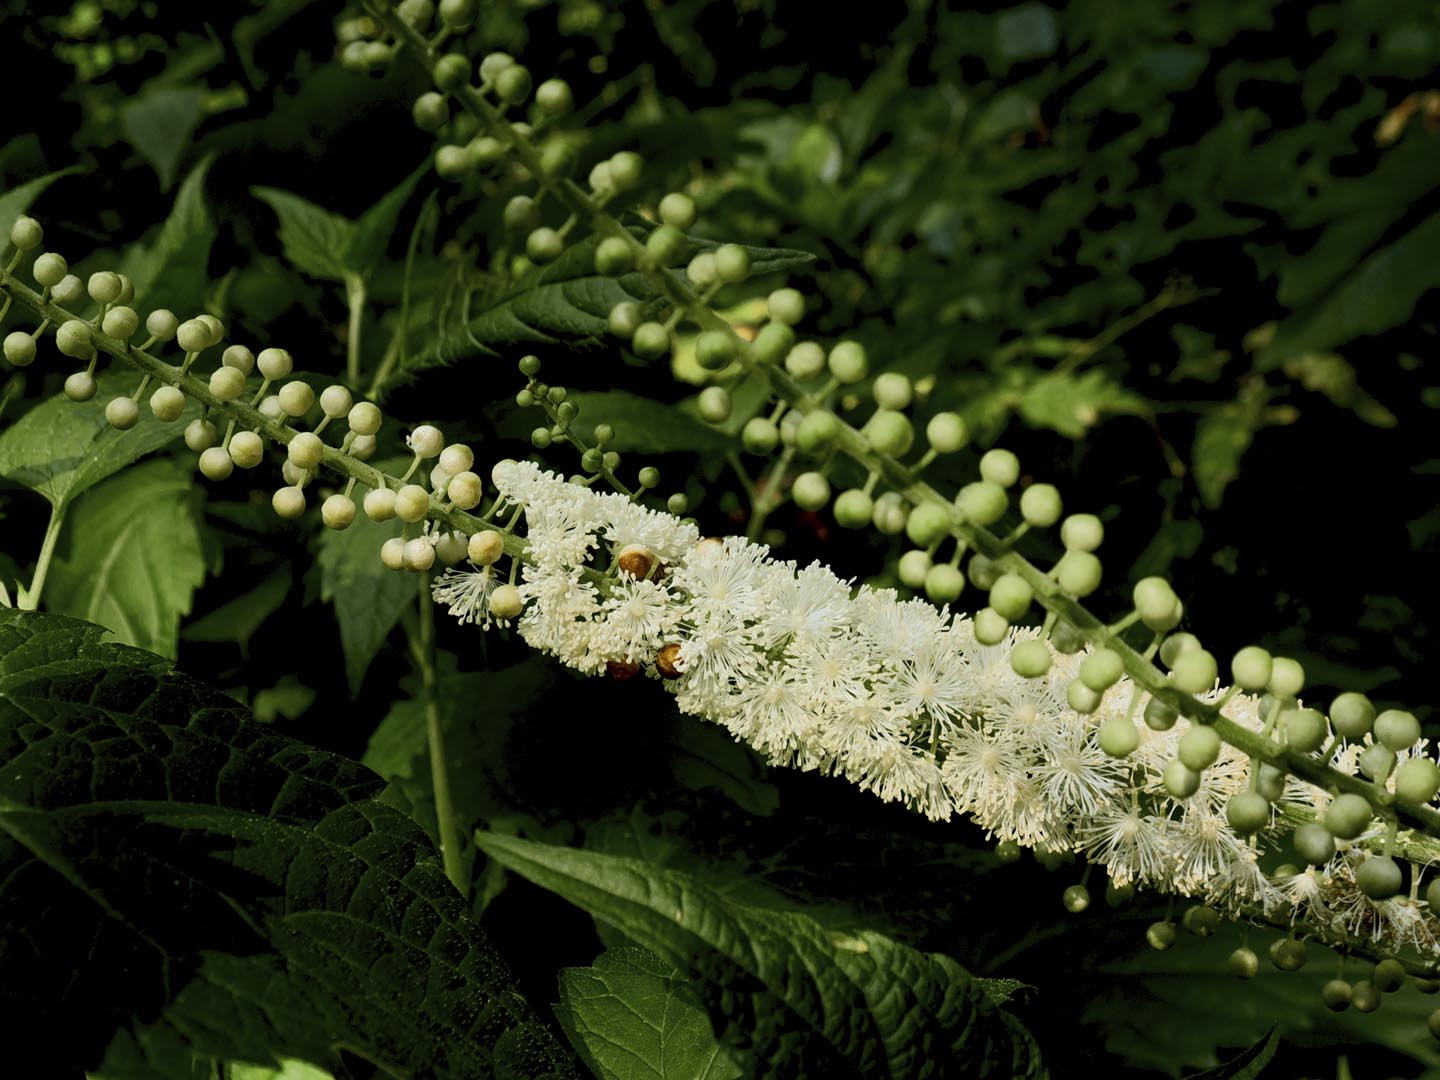 Black Cohosh Flower (Actaea racemosa) in its natural woodland setting